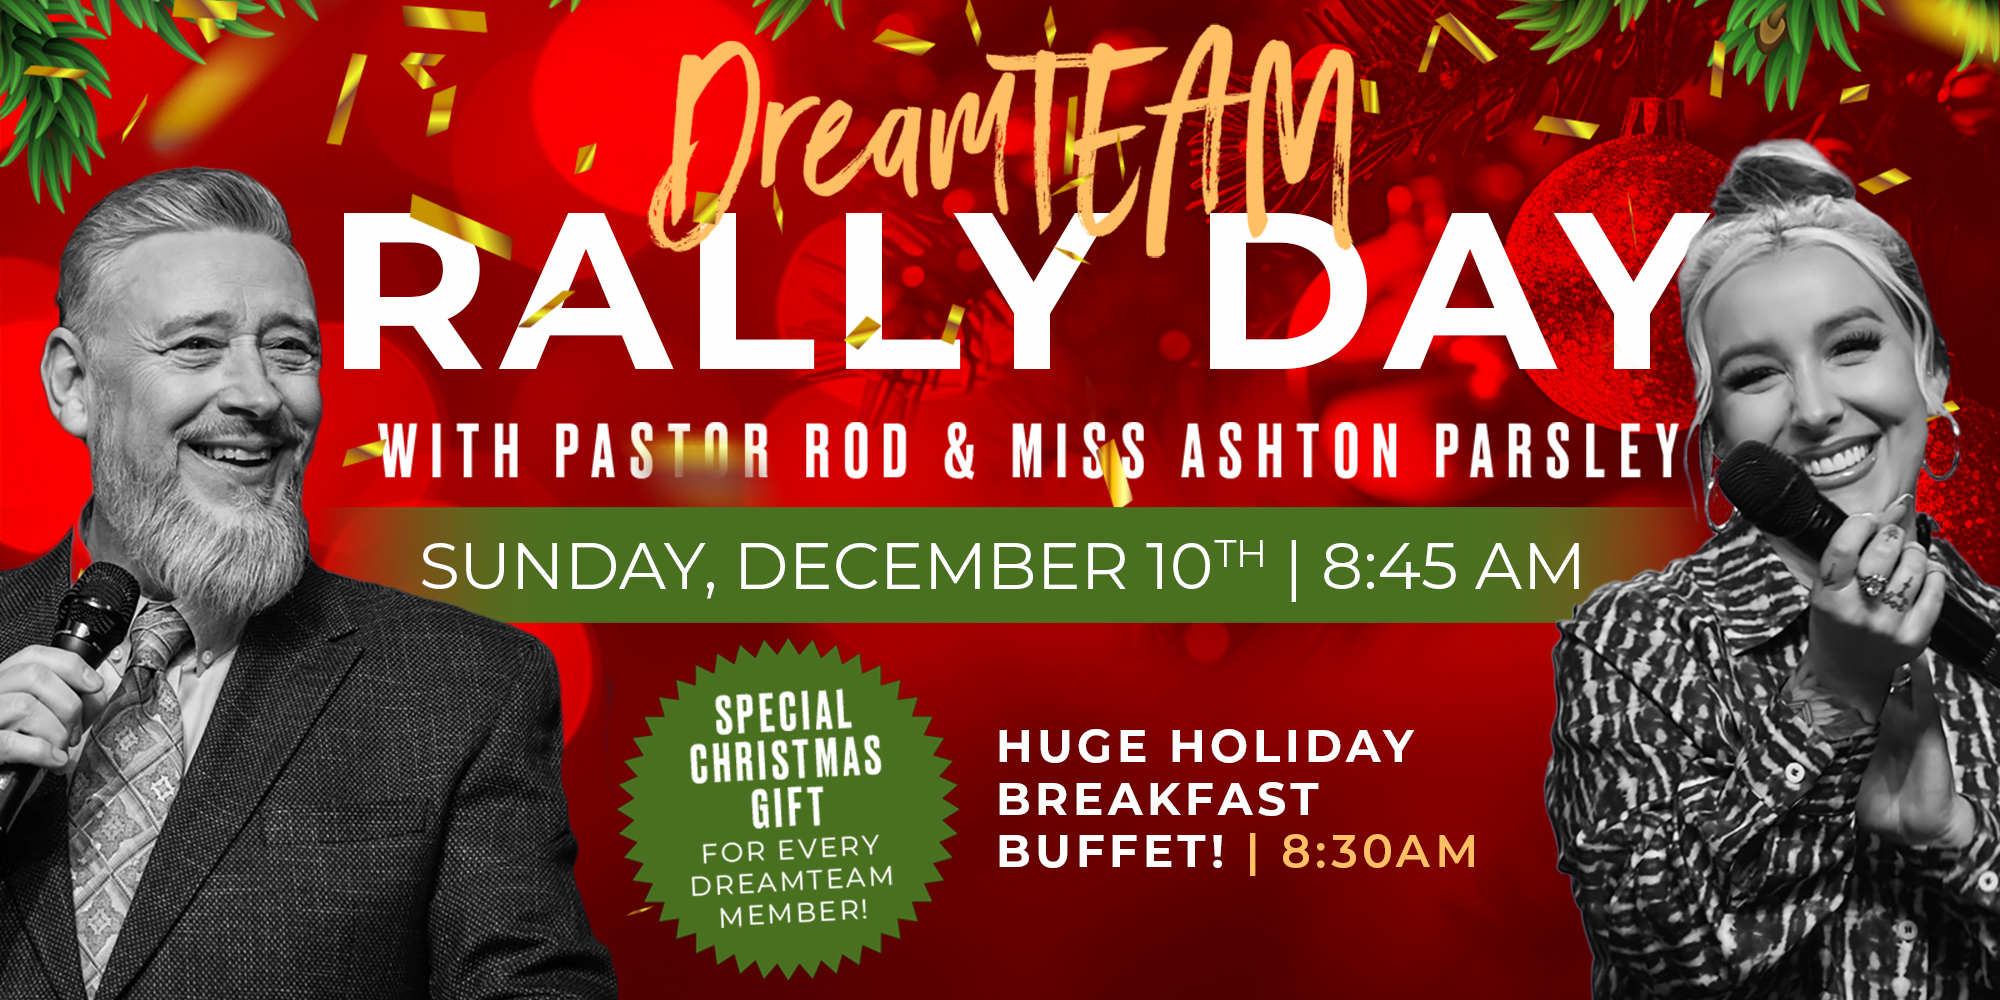 DreamTEAM Rally Day With Pastor Rod And Miss Ashton Parsley - Sunday December 10th At 8:45am - Special Christmas Gifts For Every Dream Team Member - Huge Holiday Breakfast Buffet At 8:30am